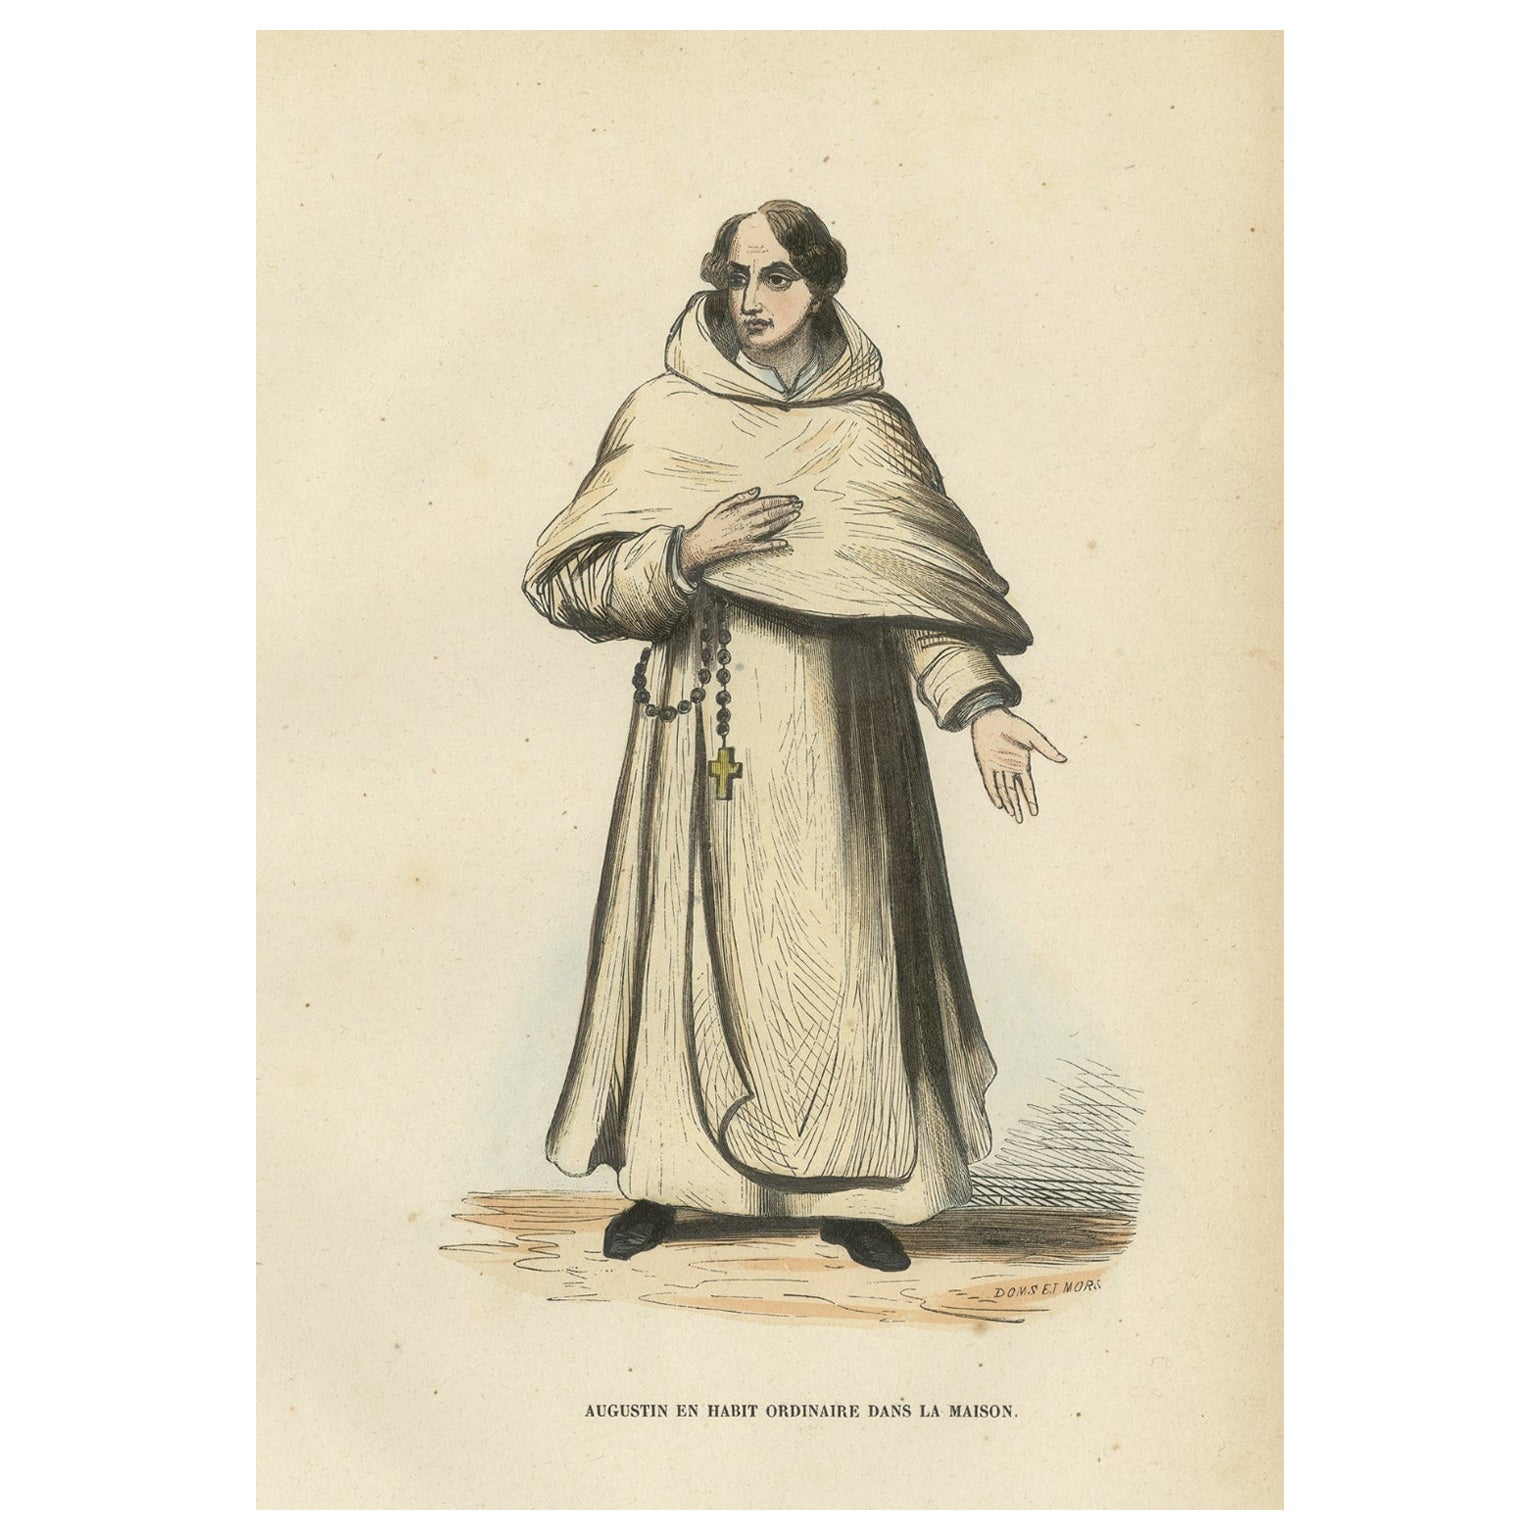 Antique Print of an Augustinian in White Habit of a Christian Religious Order For Sale